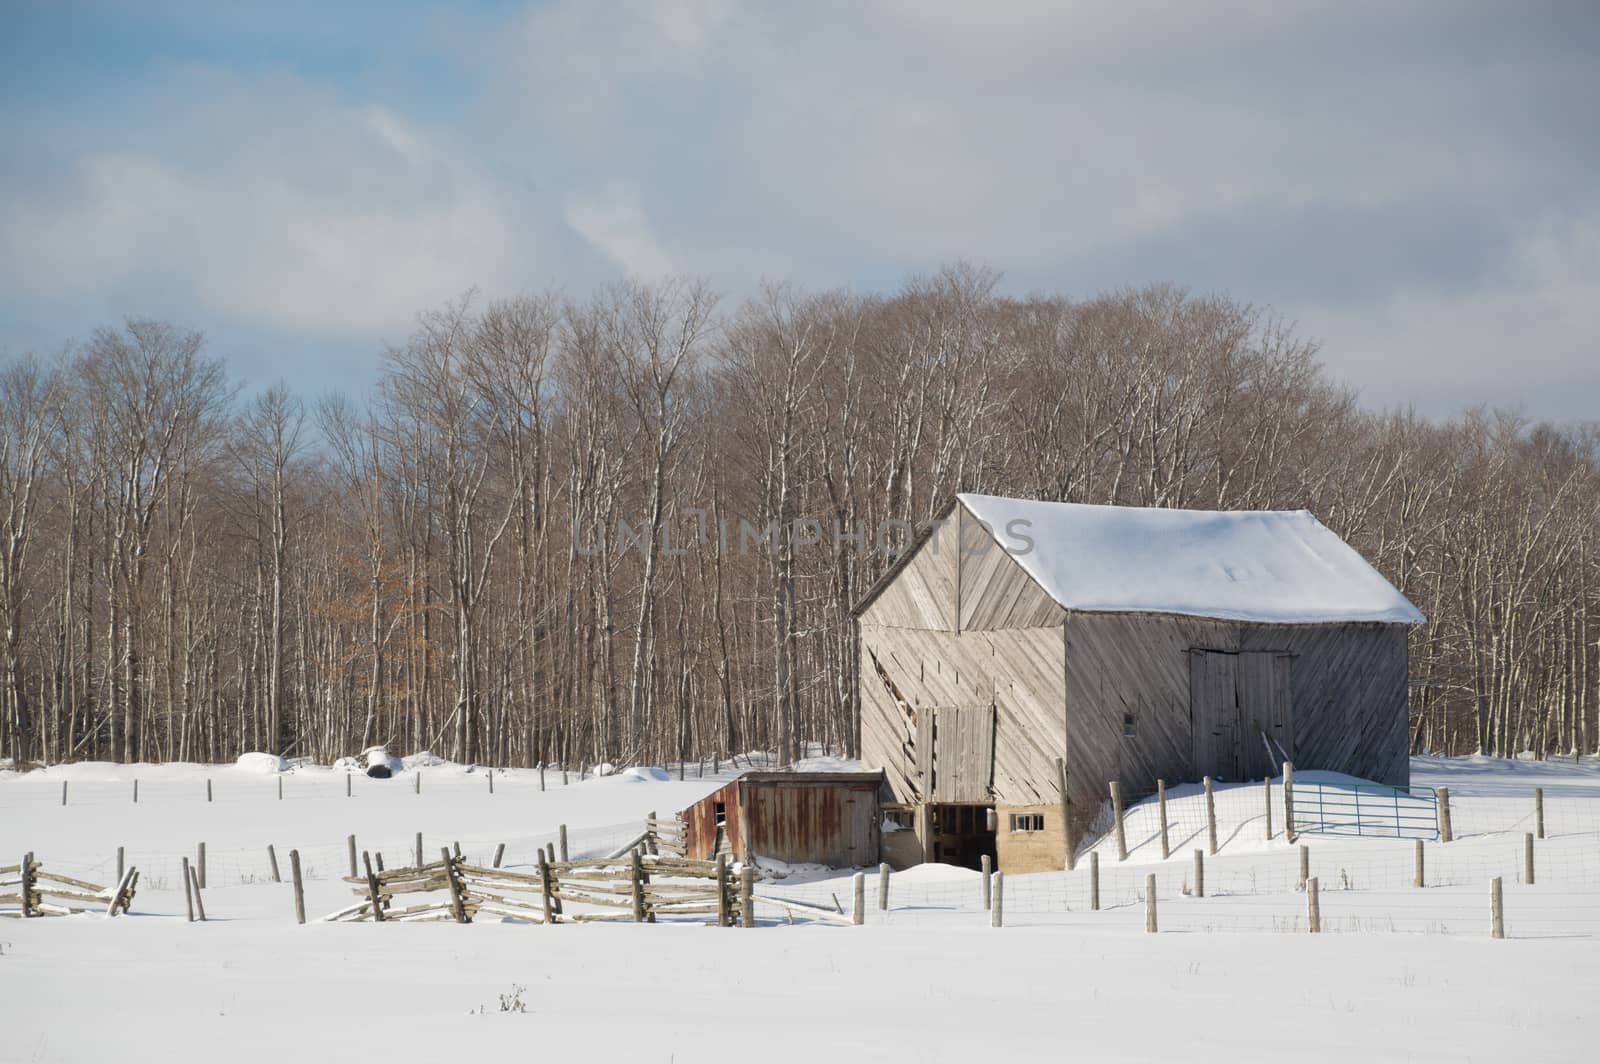 Snowy old  barn with diagonal boards and barnyard landscape by Sublimage